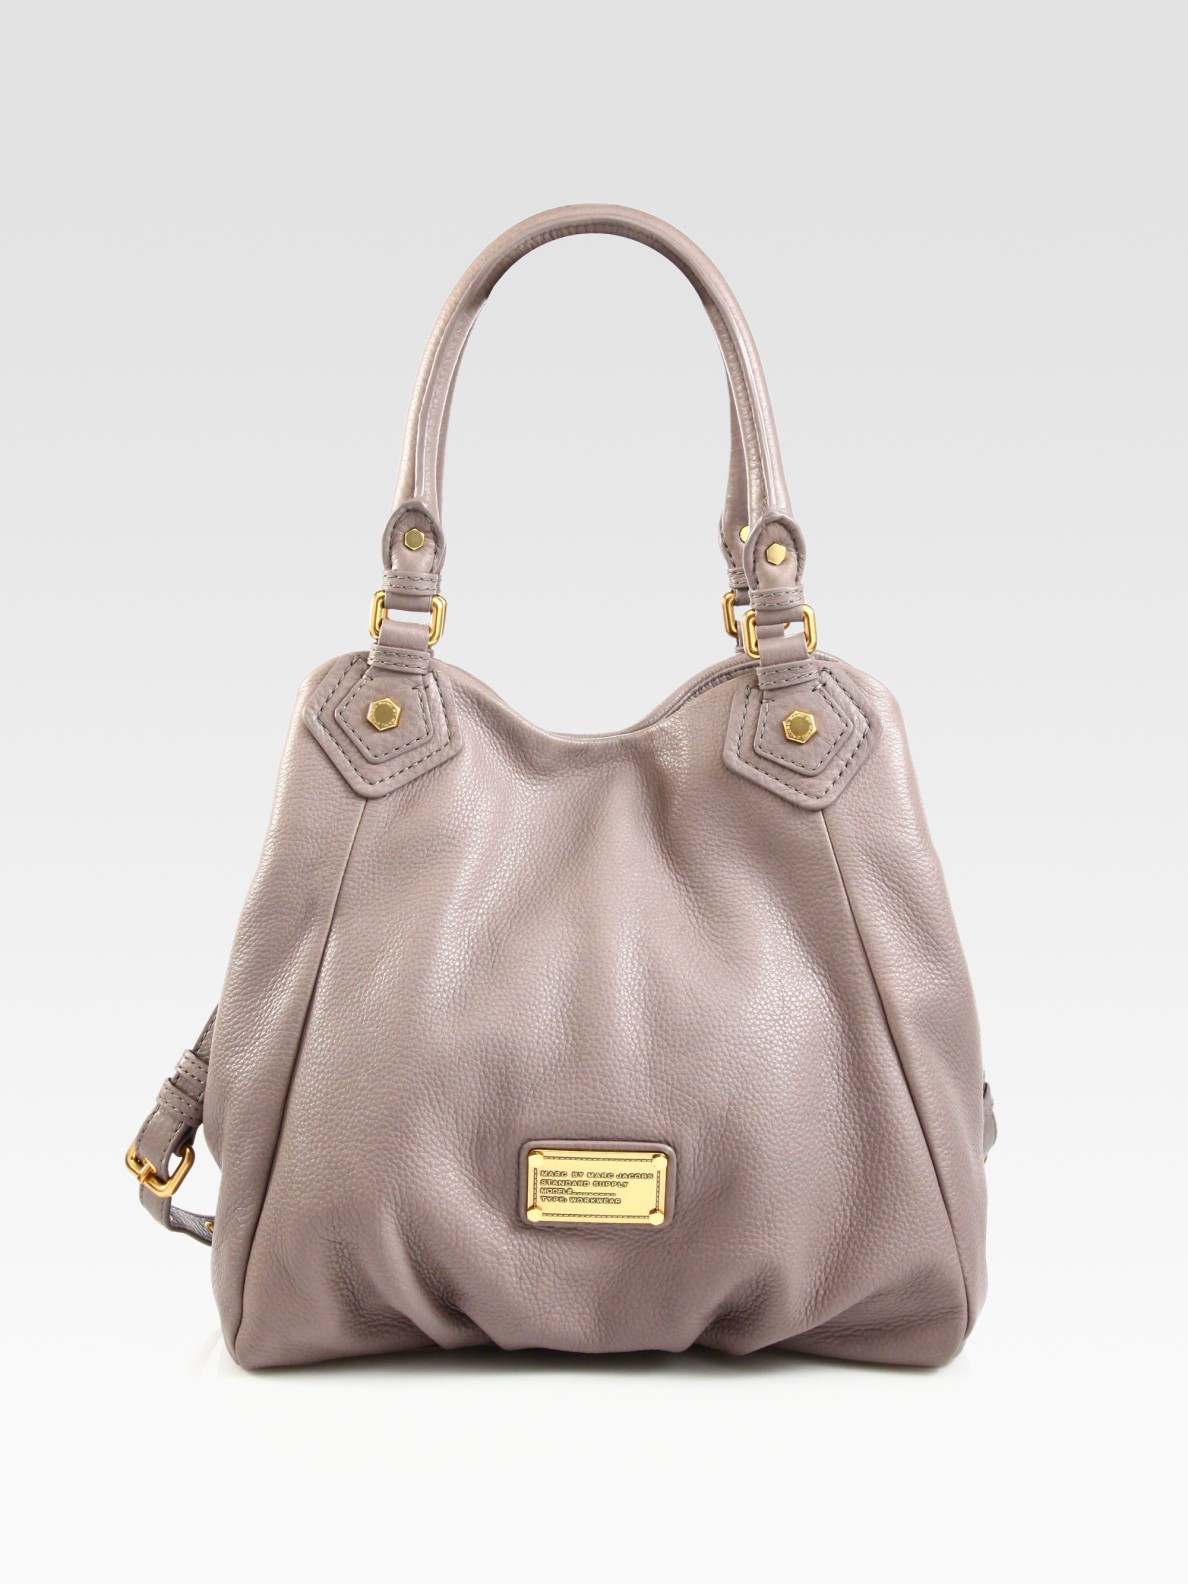 Marc By Marc Jacobs Classic Q Fran Tote Bag in Mink (Natural) - Lyst